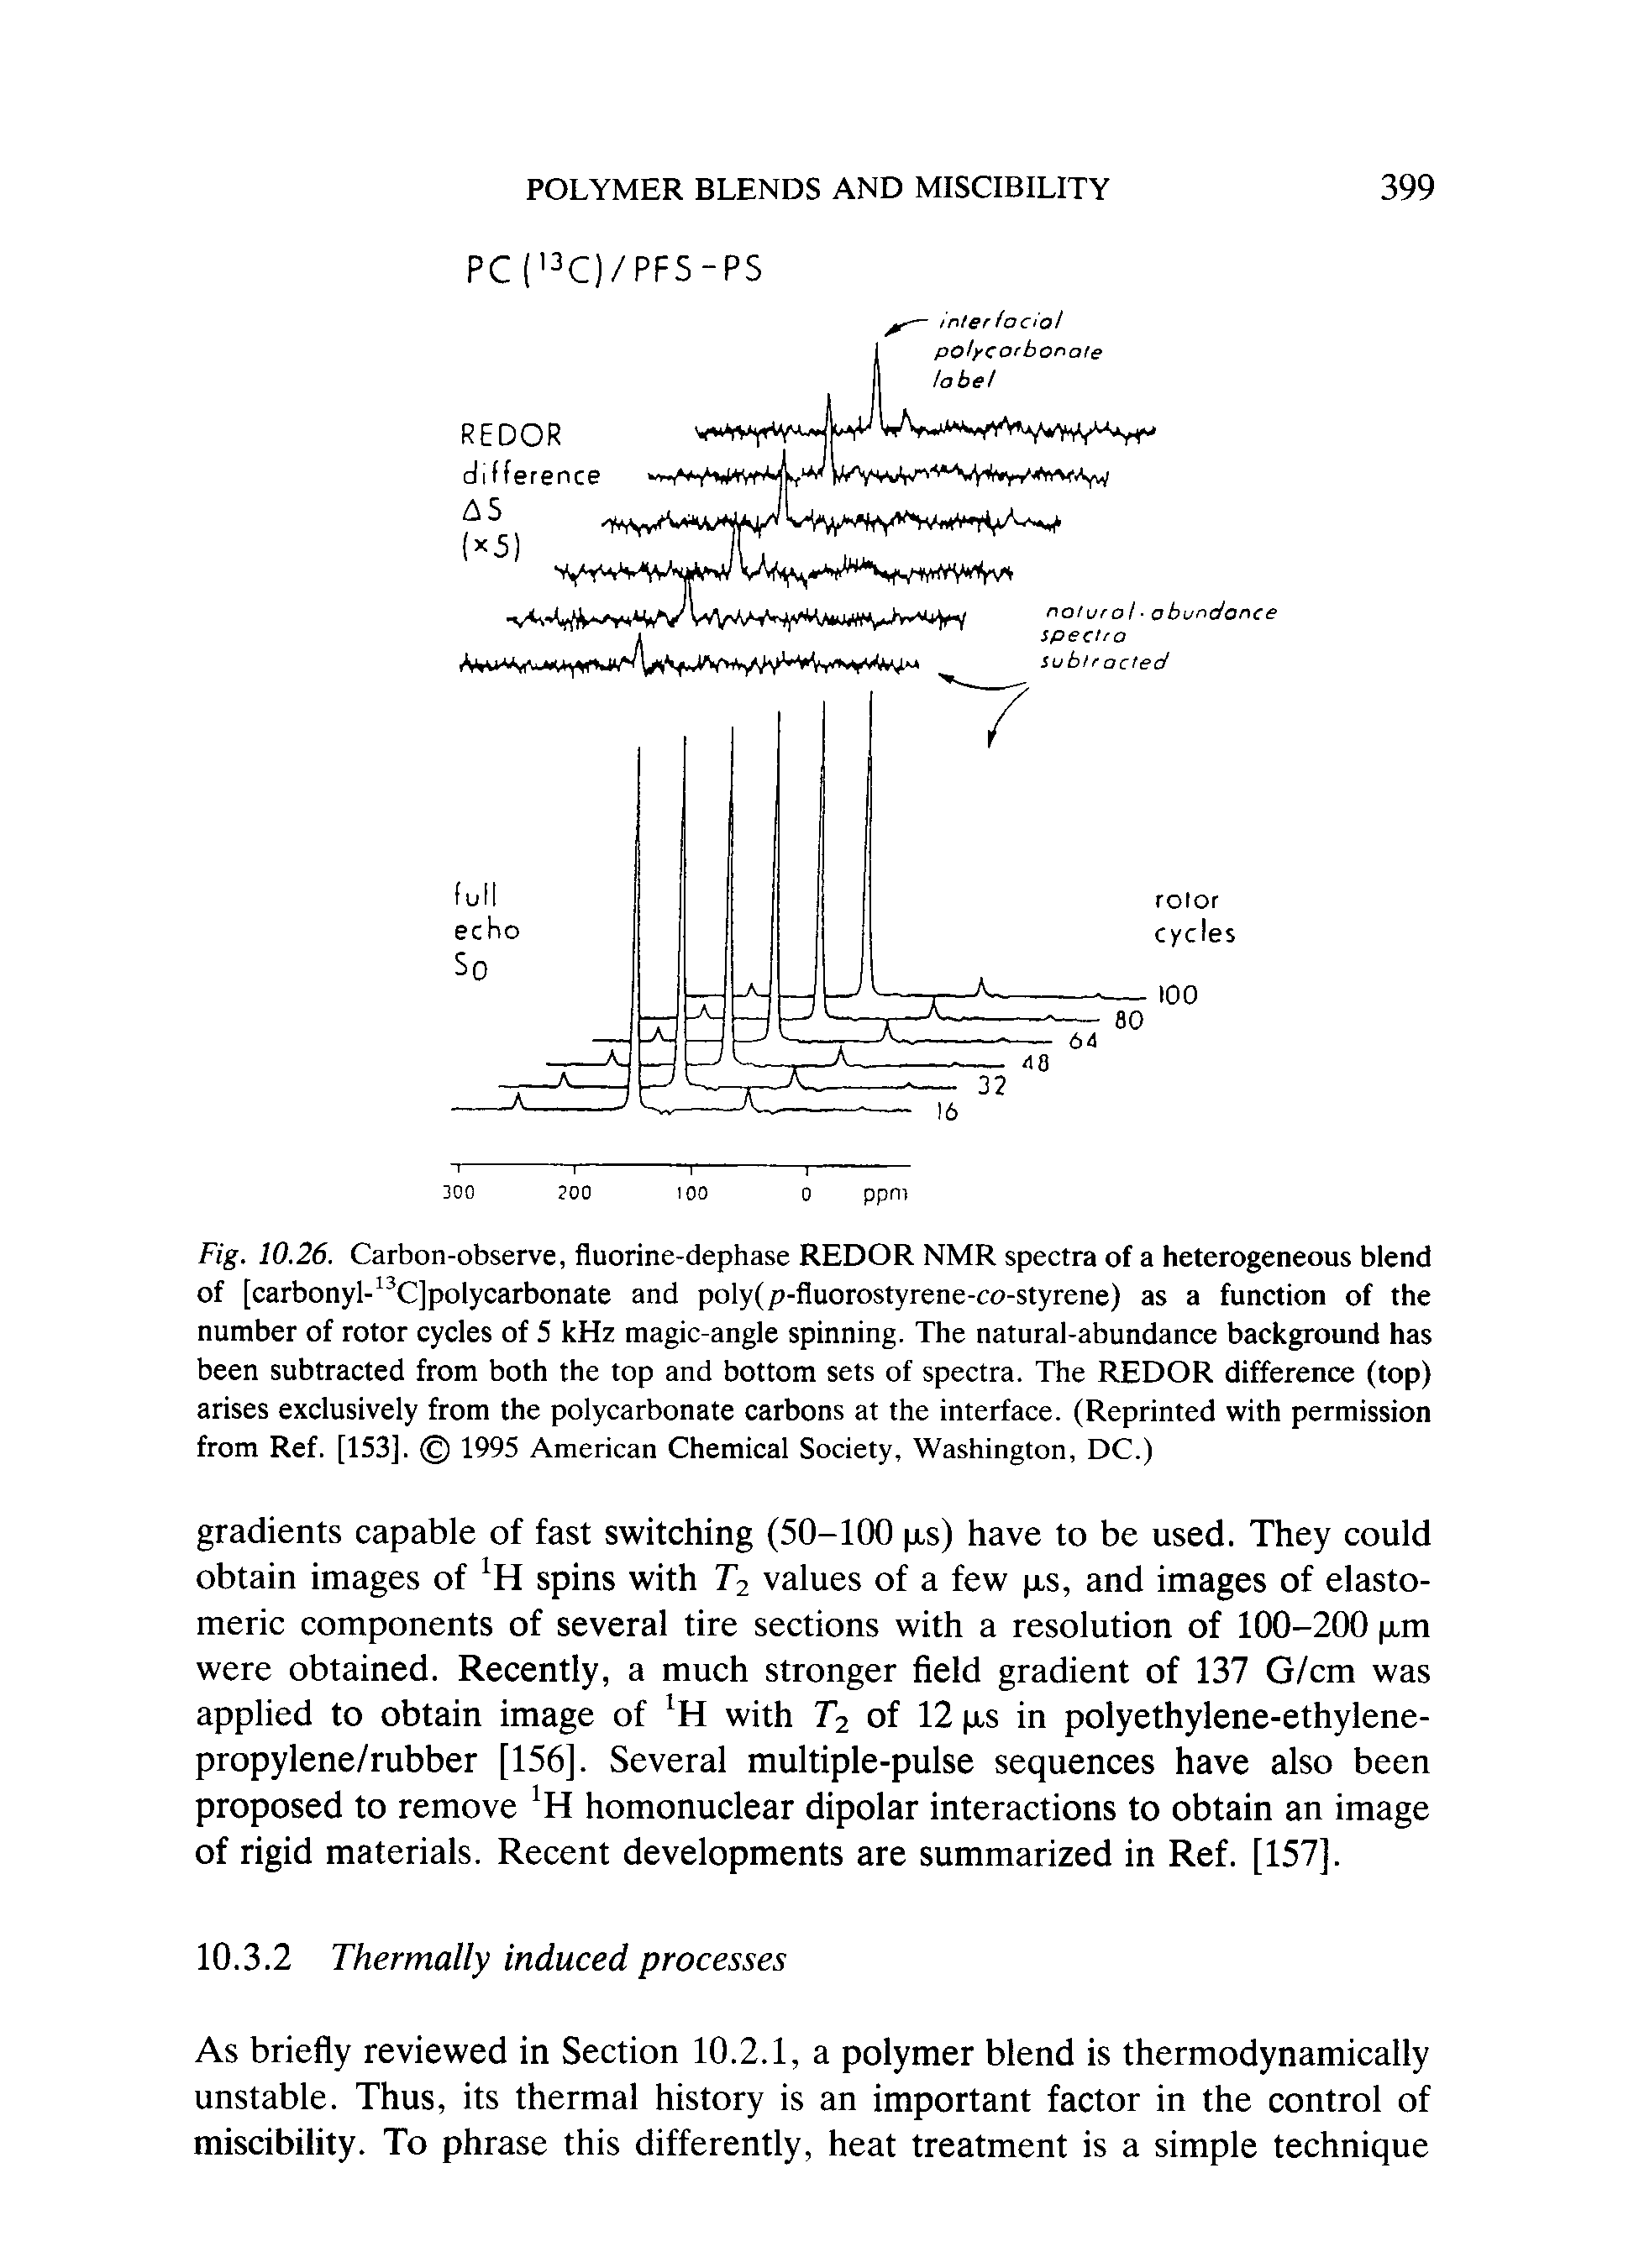 Fig. 10.26. Carbon-observe, fluorine-dephase REDOR NMR spectra of a heterogeneous blend of [carbonyl- CJpolycarbonate and poly(p-fluorostyrene-co-styrene) as a function of the number of rotor cycles of 5 kHz magic-angle spinning. The natural-abundance background has been subtracted from both the top and bottom sets of spectra. The REDOR difference (top) arises exclusively from the polycarbonate carbons at the interface. (Reprinted with permission from Ref. [153]. 1995 American Chemical Society, Washington, DC.)...